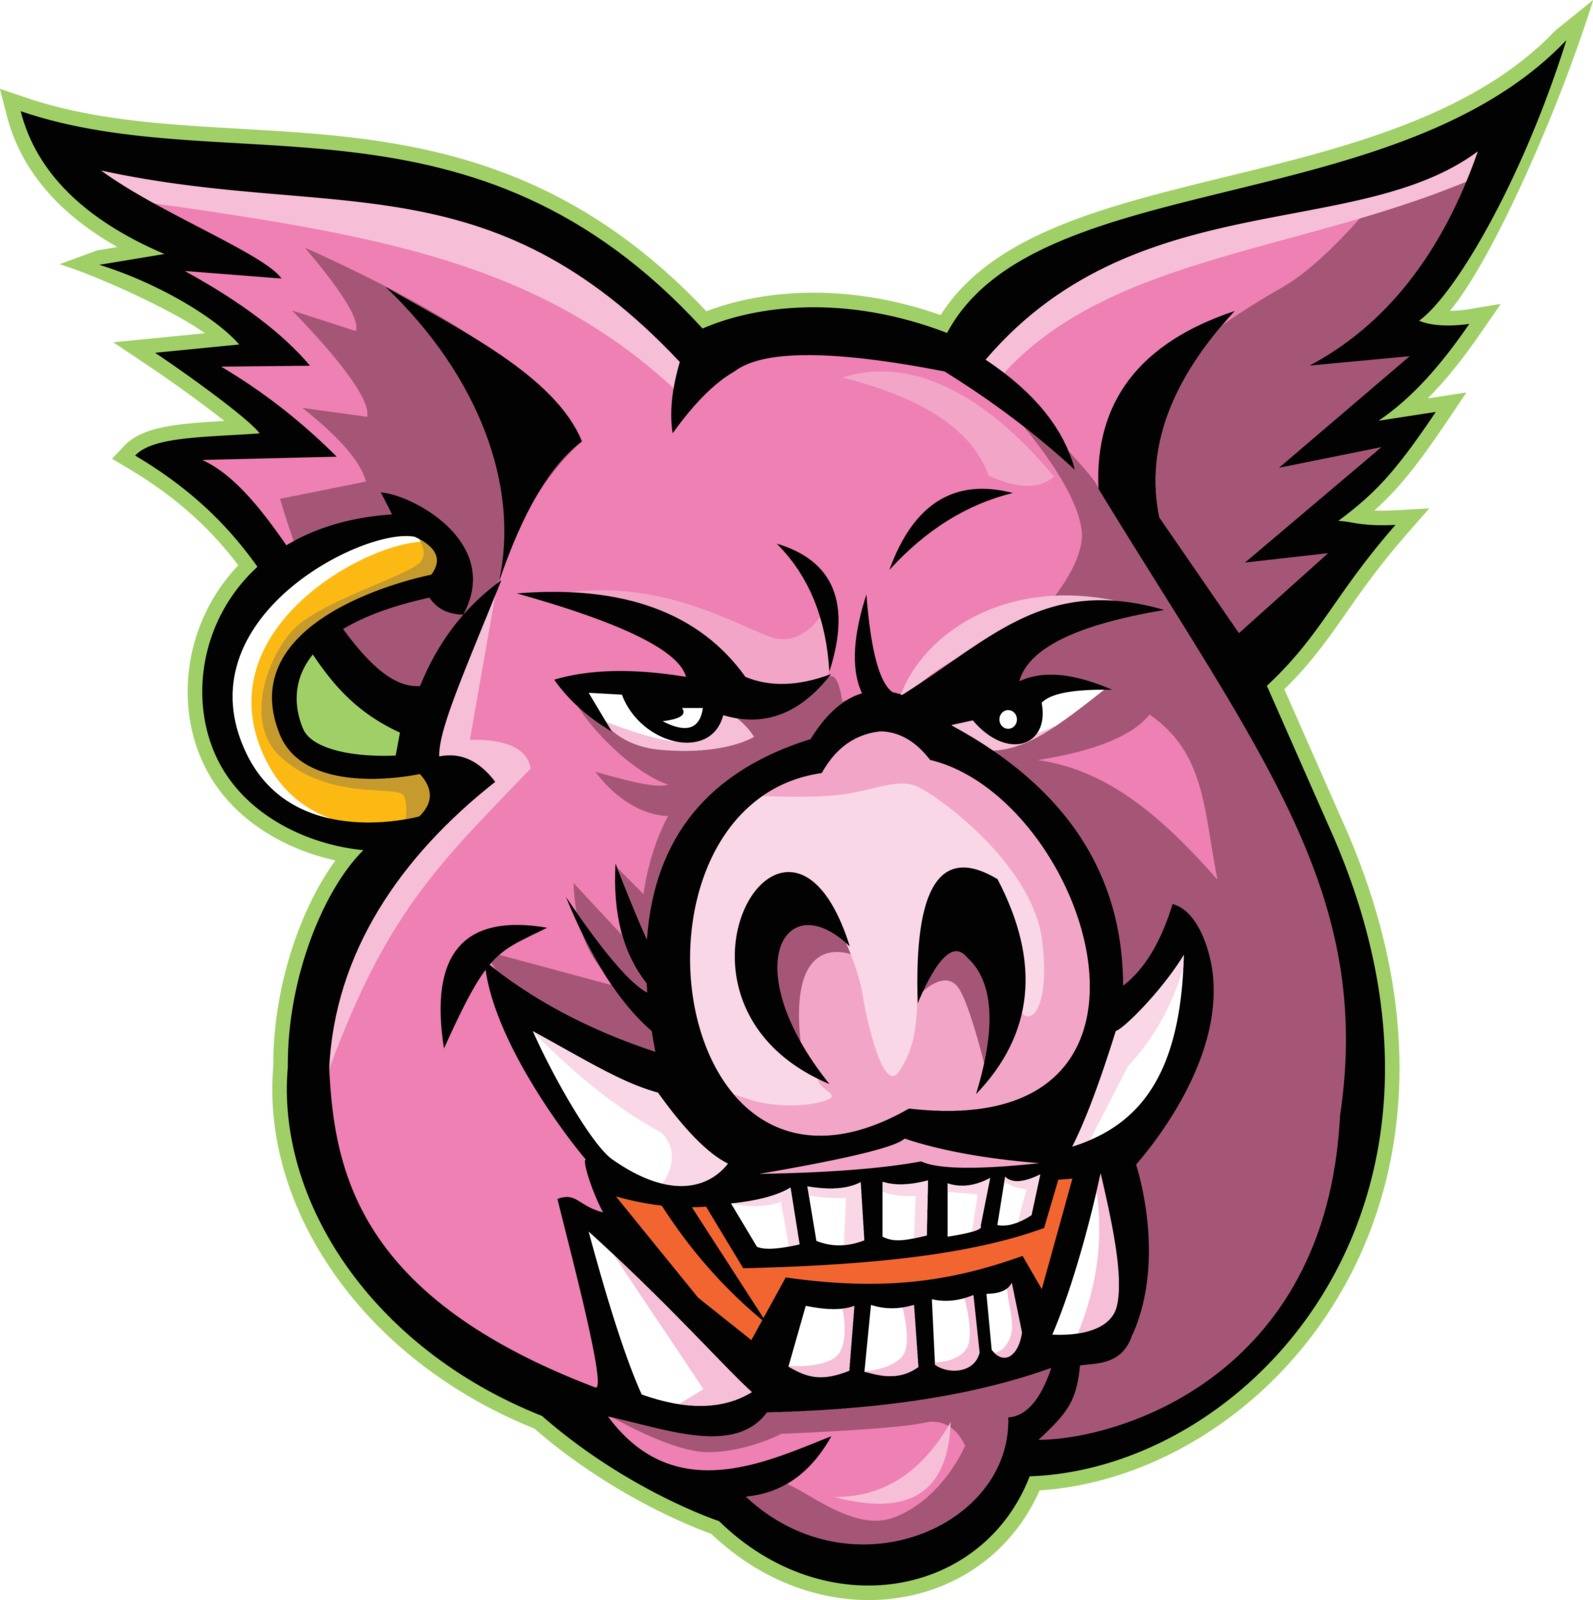 Pink Pig Wearing Earring Mascot by patrimonio